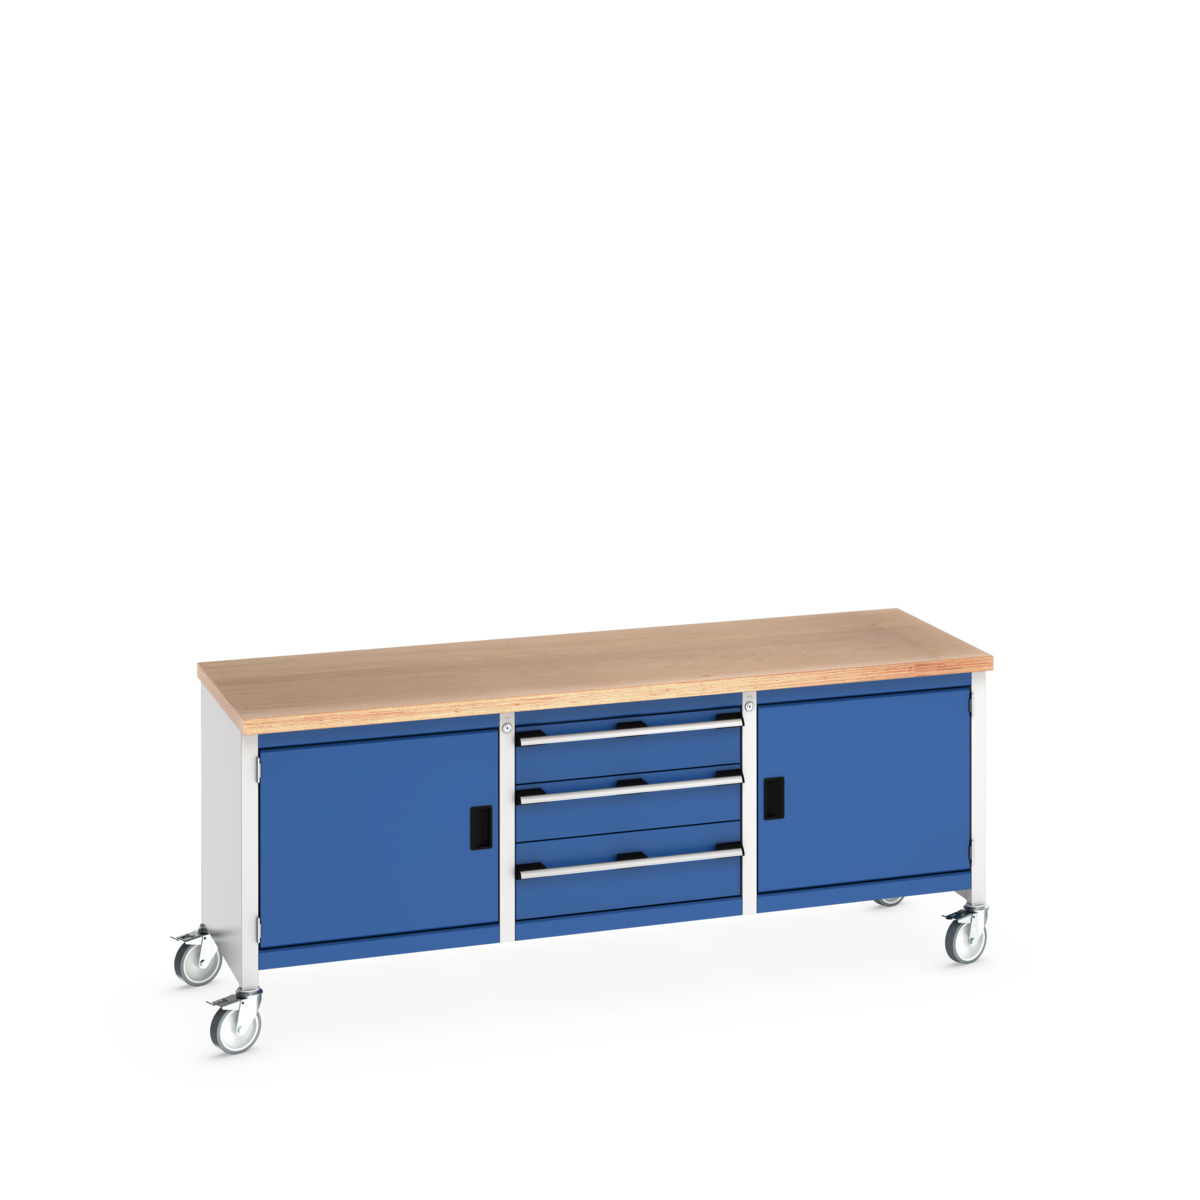 41002124.11V - cubio mobile storage bench (mpx)